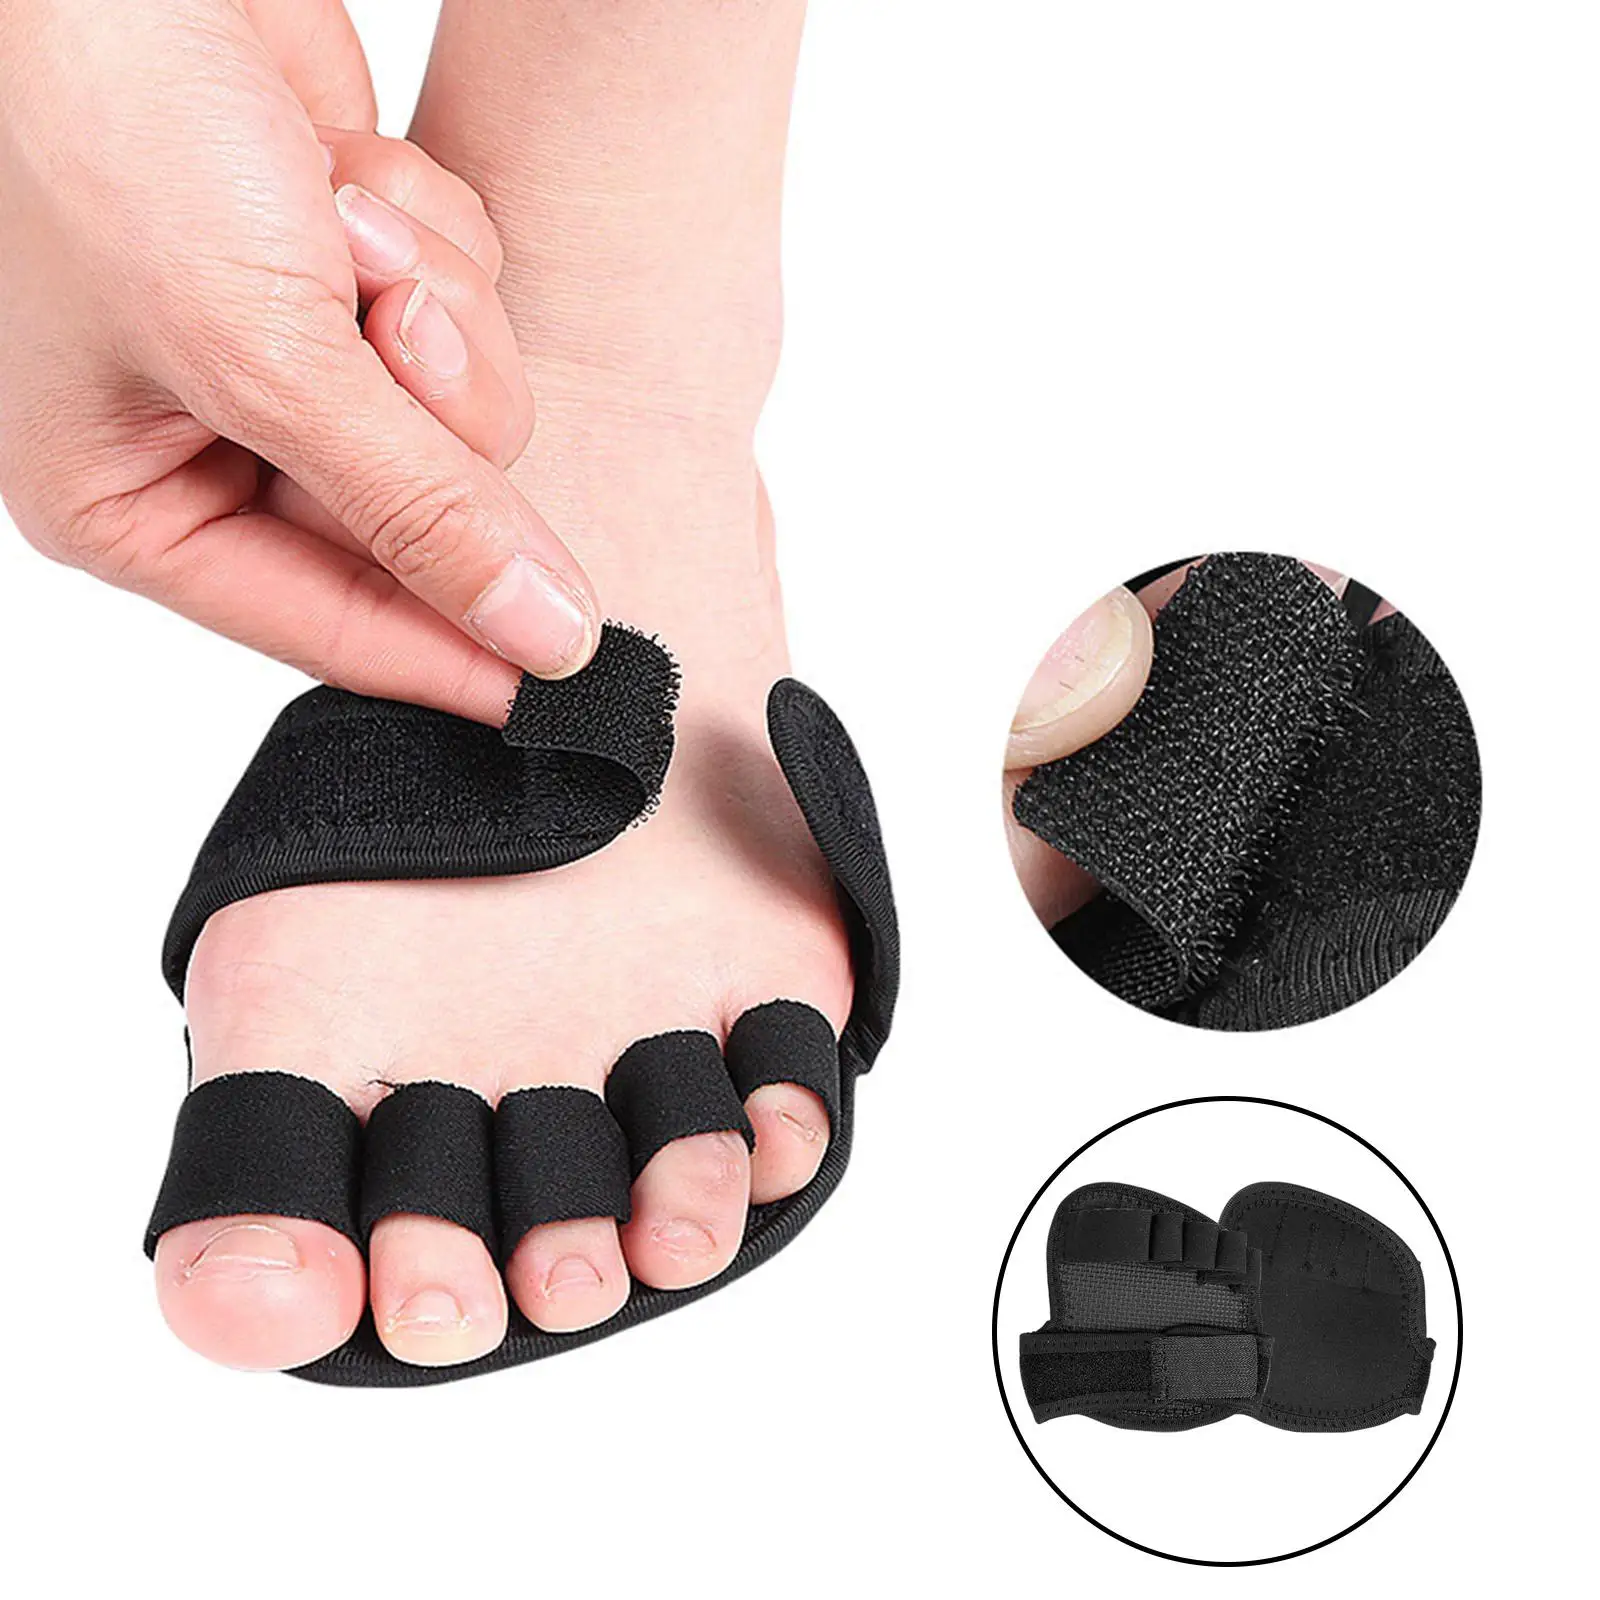 Universal Toe Separator Soft Forefoot Pads Corrector Pedicure Socks for Realign Crooked Toes Hallux Valgus for Ballet Men Women